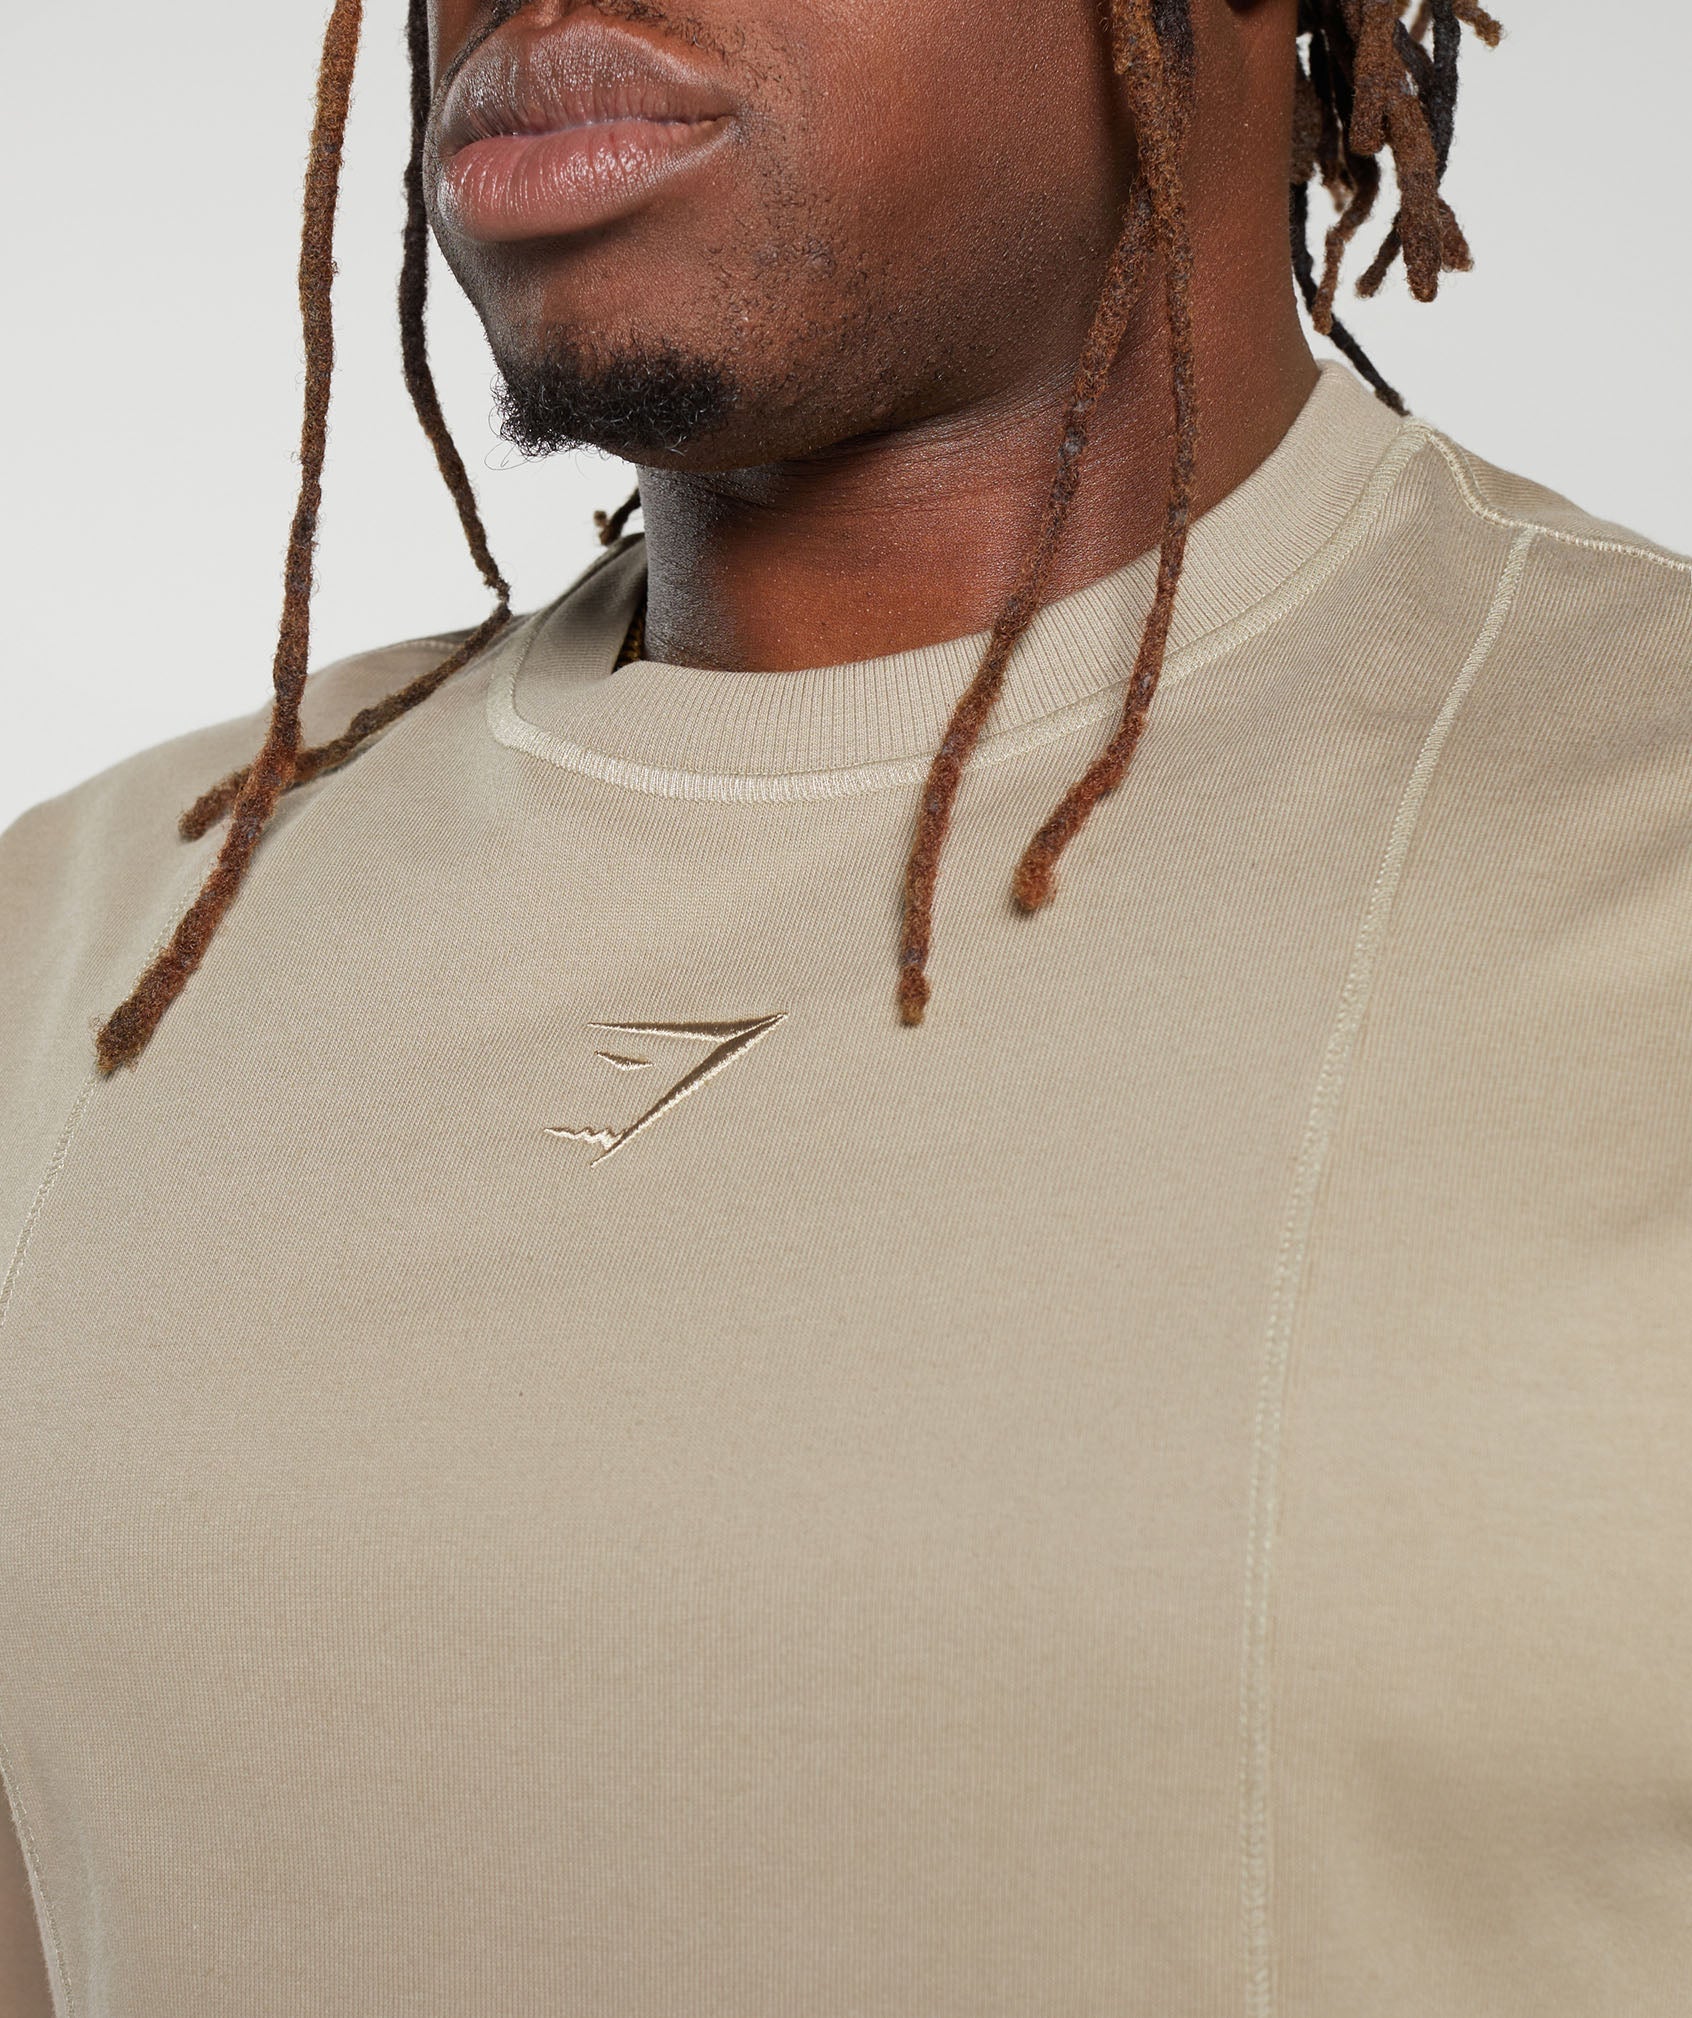 Premium Lifting T-Shirt in Sand Brown - view 7